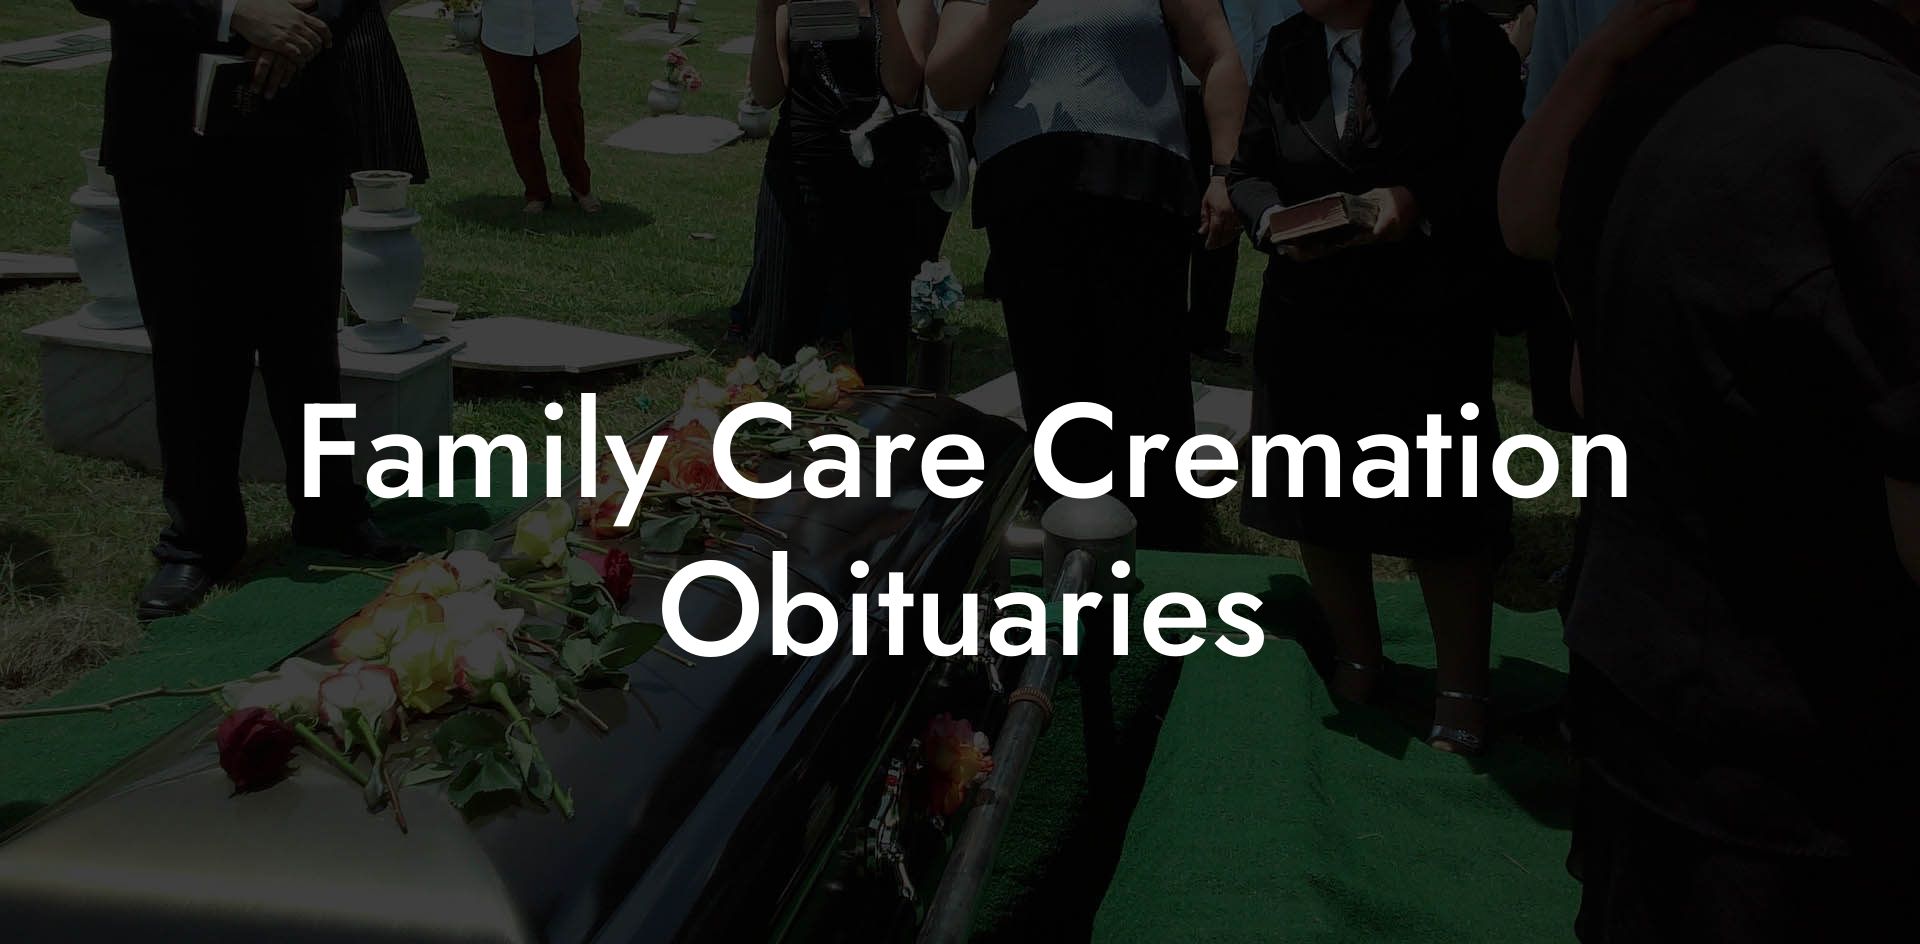 Family Care Cremation Obituaries